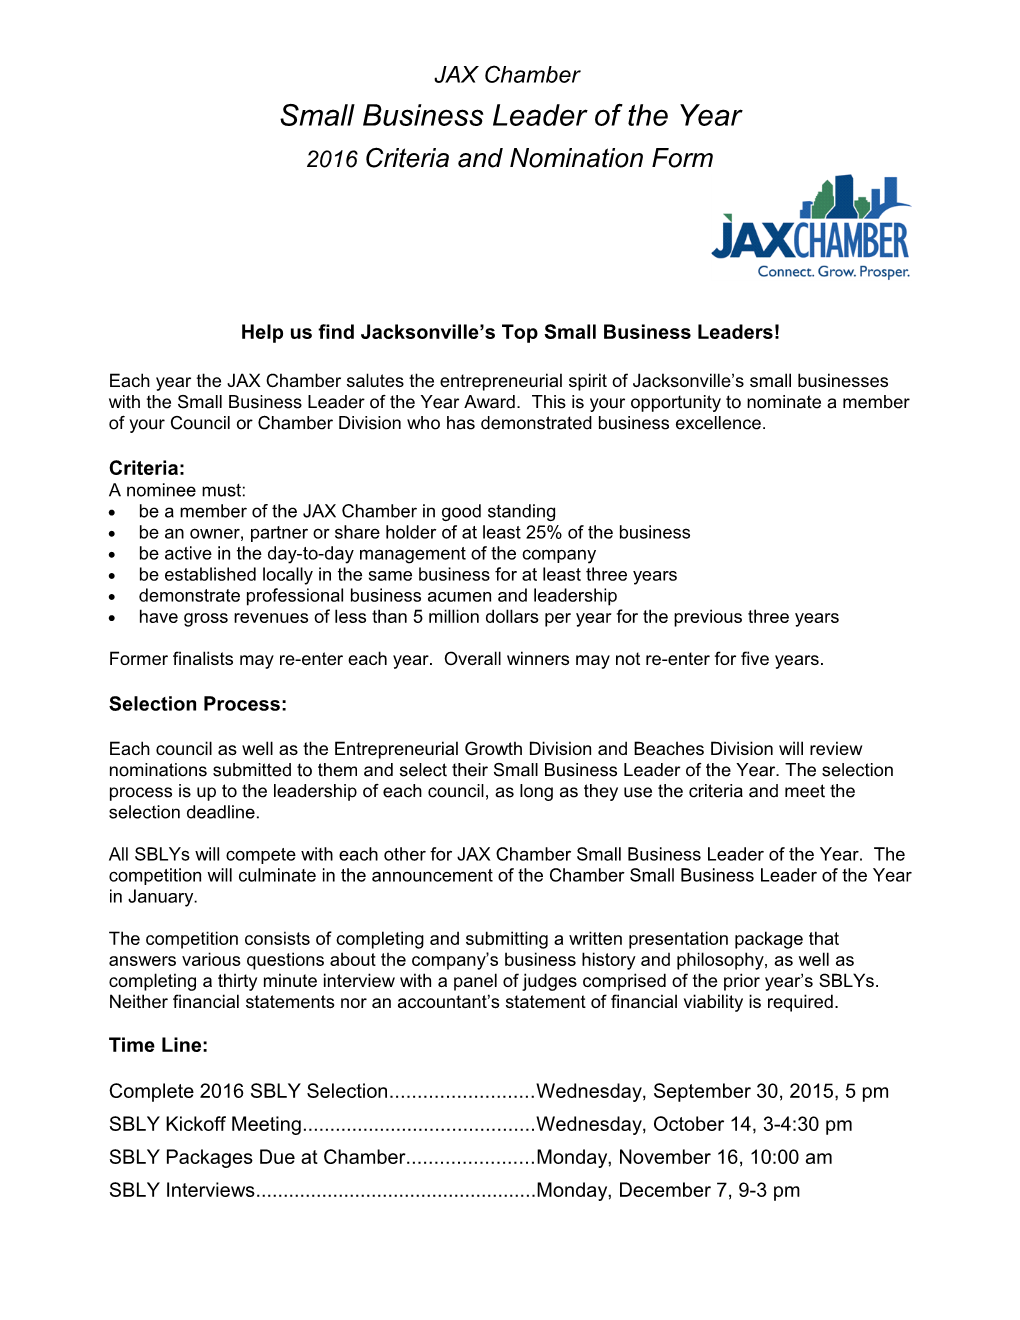 Help Us Find Jacksonville S Top Small Business Leaders